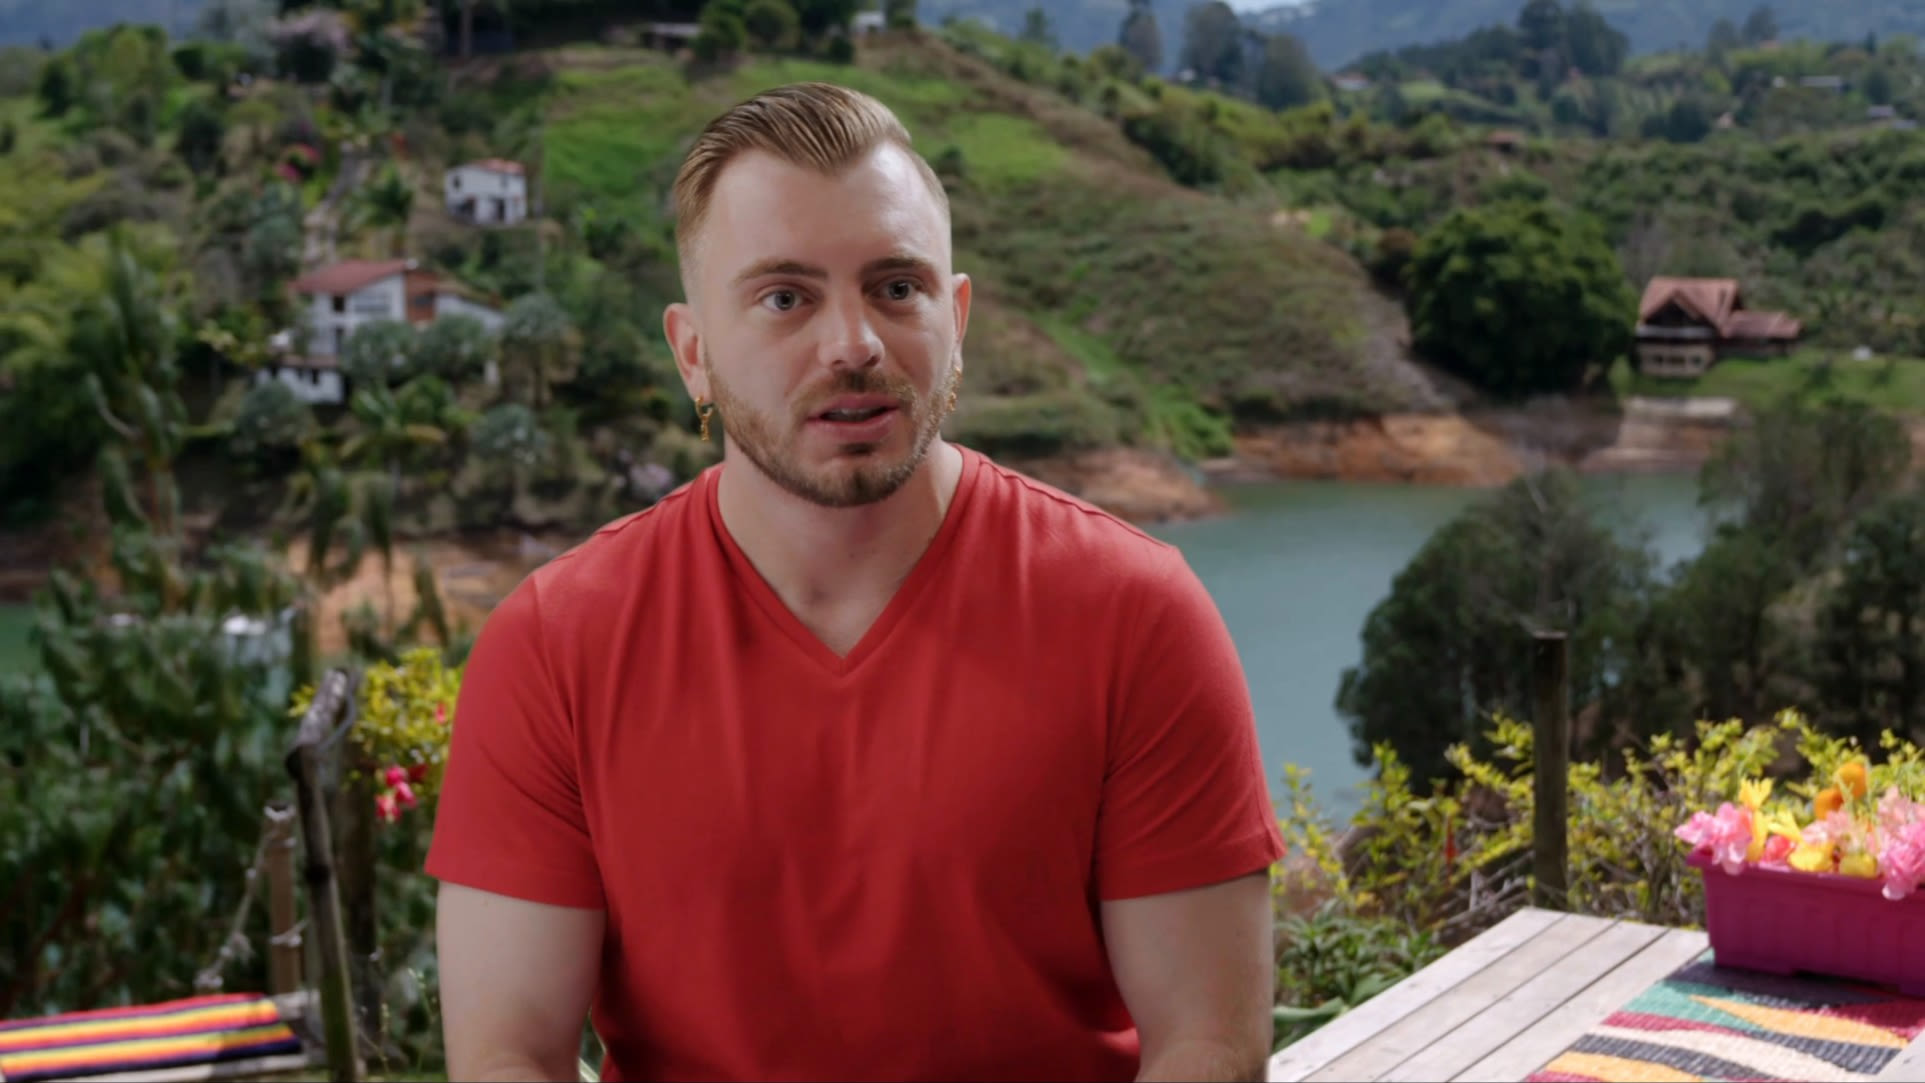 STD Tests and Prenuptial Agreements! 90 Day Fiance: Love in Paradise Season 4, Episode 6 Recap